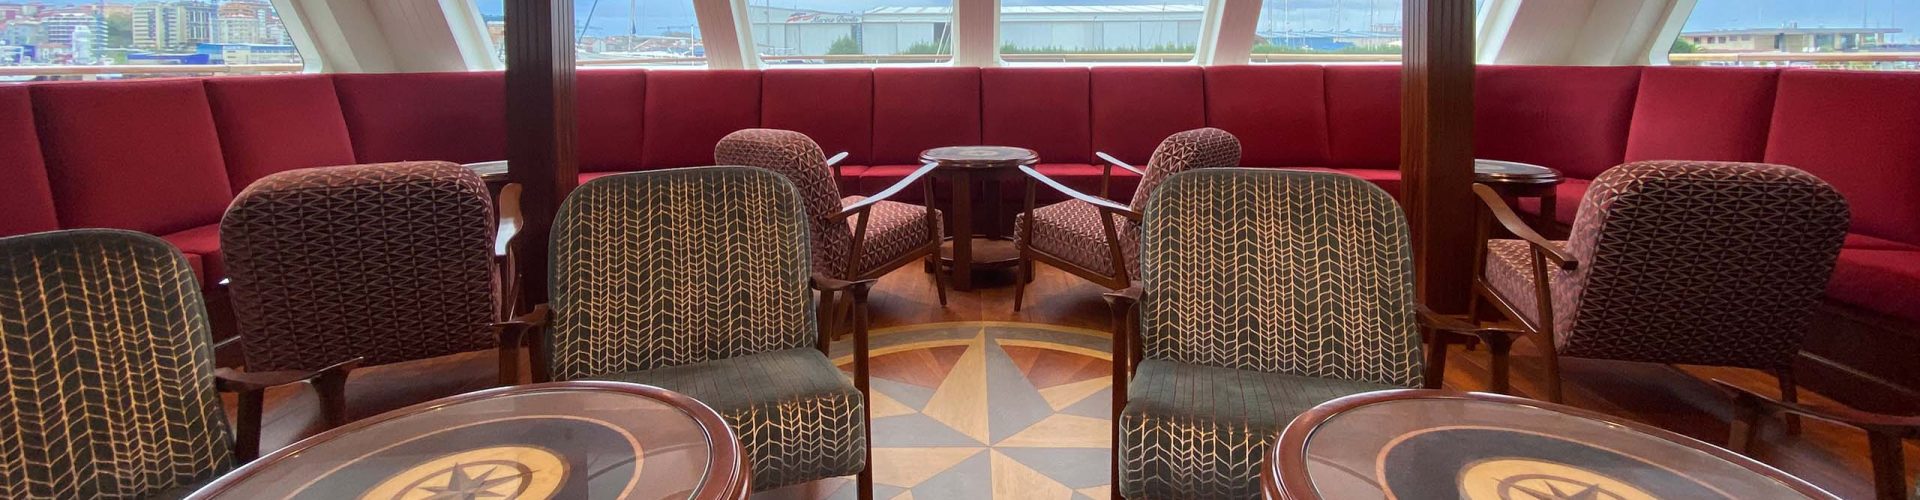 The luxury lounge with its panoramic views on the Lord of the Glens cruise ship